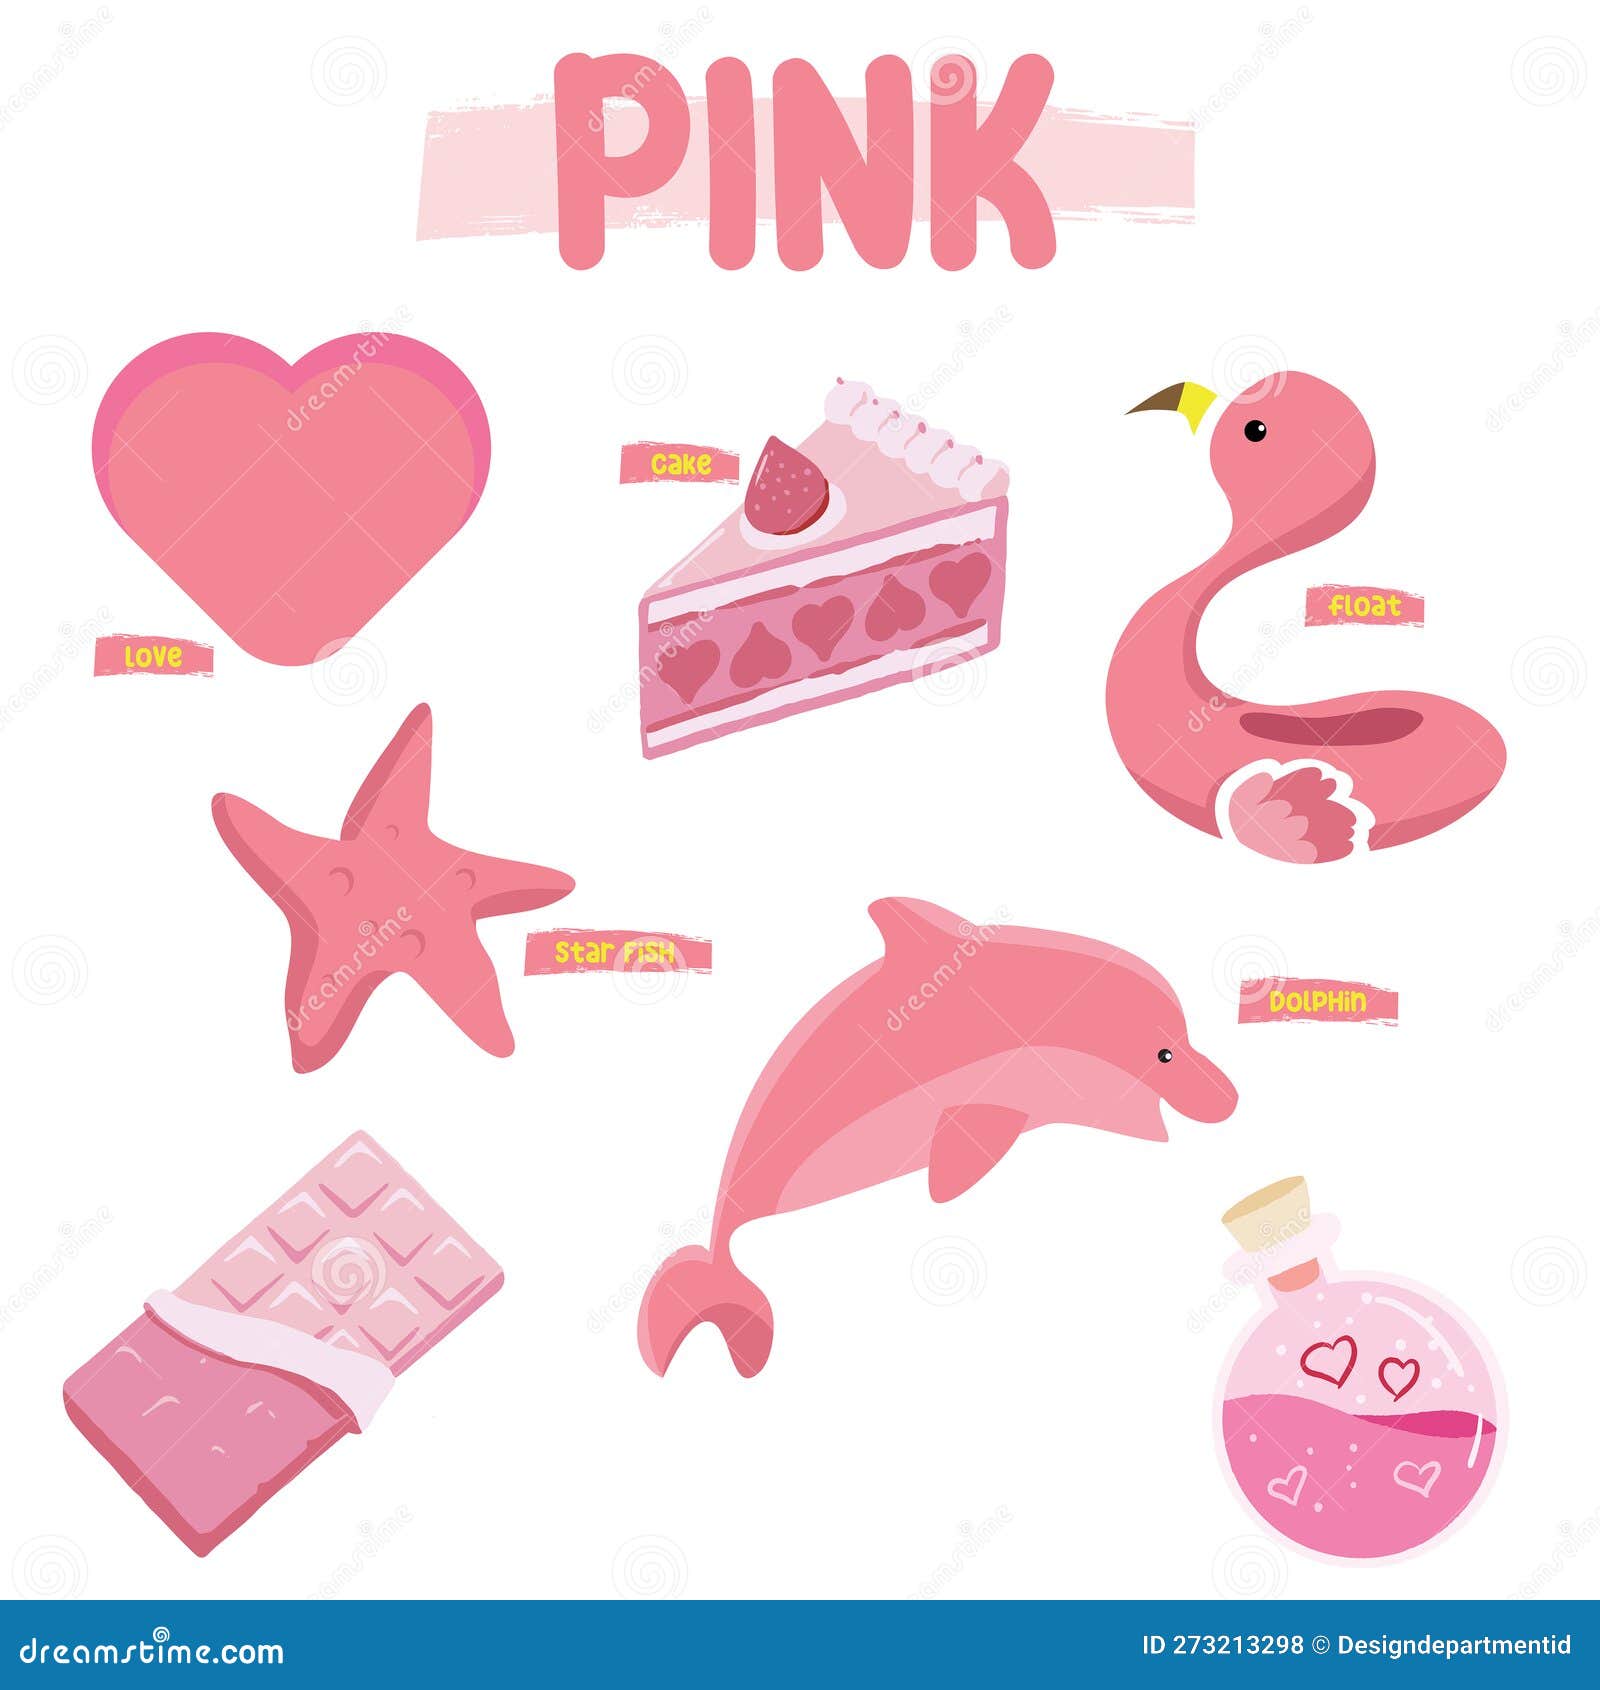 Pink Things • Color Clip Art • SpeakEazySLP